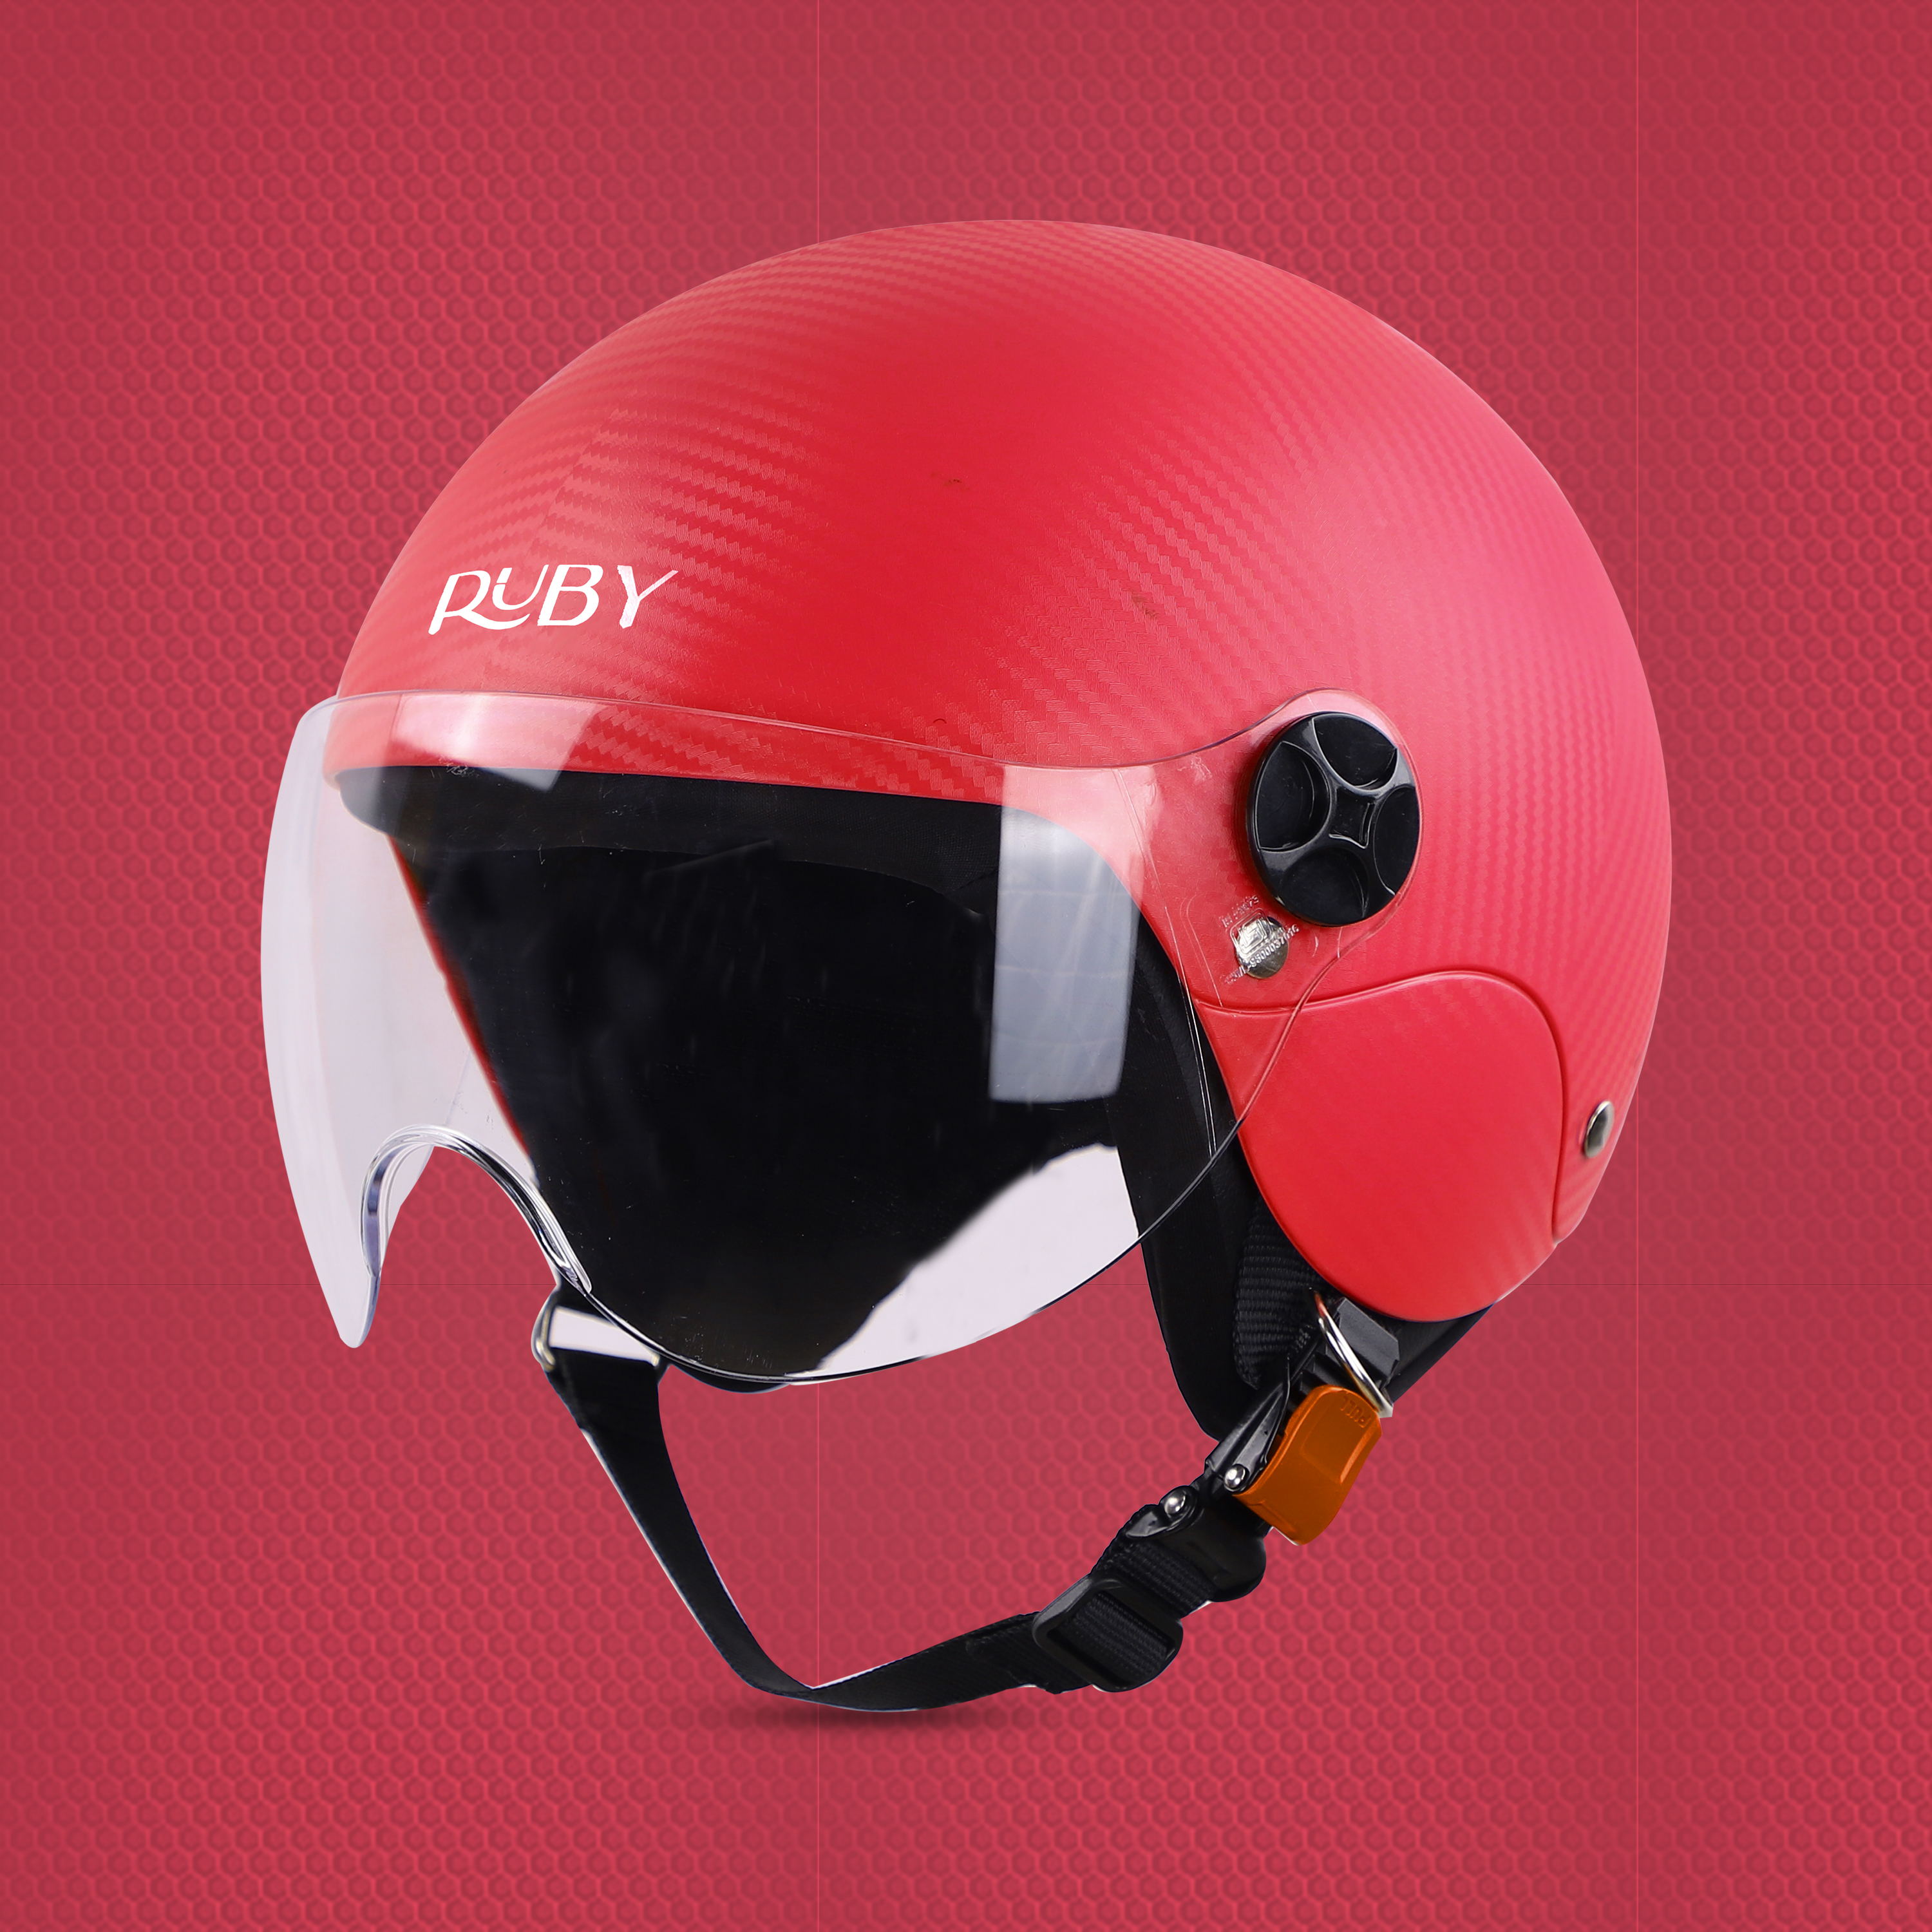 Steelbird SBH-16 Ruby ISI Certified Open Face Helmet (Dashing Red With Clear Visor)